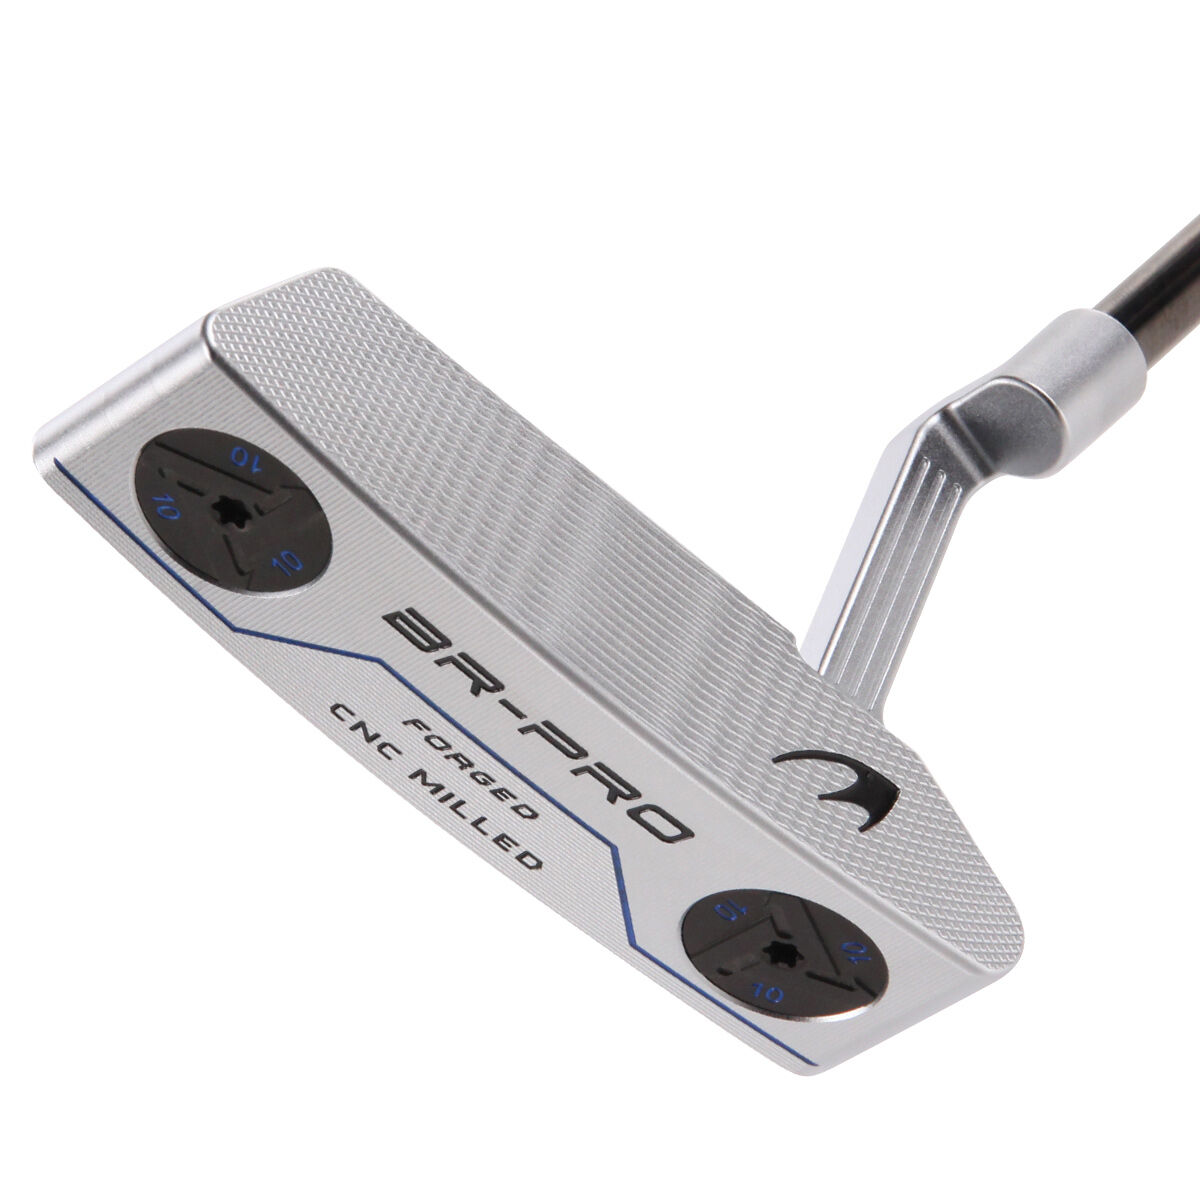 Benross Silver, Black Br-Pro Milled Blade Golf Putter, Right Hand, Size: 34 inches | American Golf von Benross